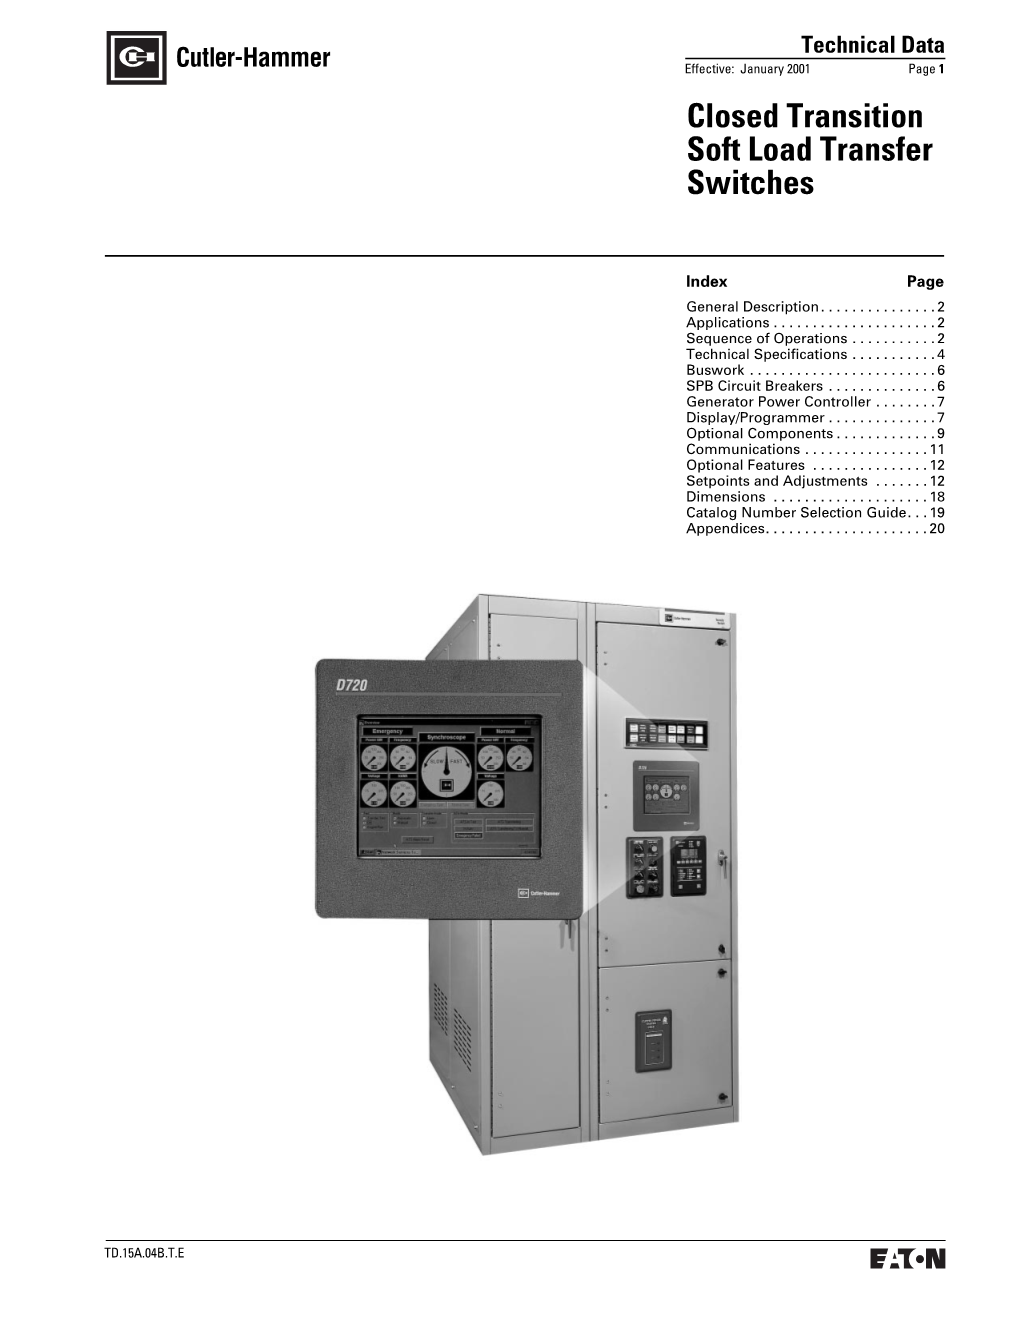 Closed Transition Soft Load Transfer Switches